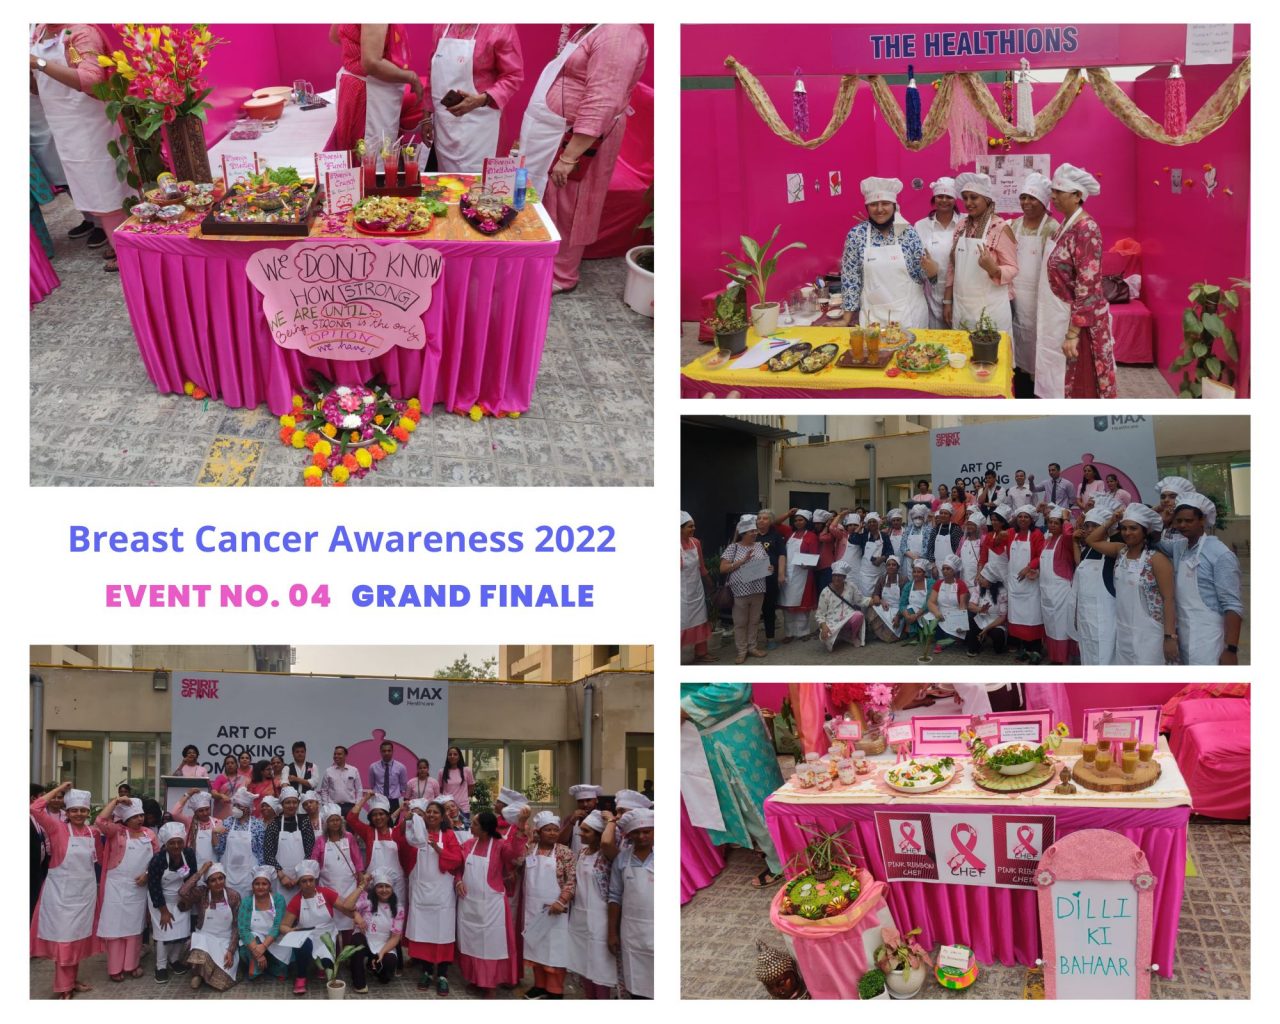 Breast-Cancer-Awareness-Month-Event-No.-4-The-Grand-Finale-1280x1024.jpg